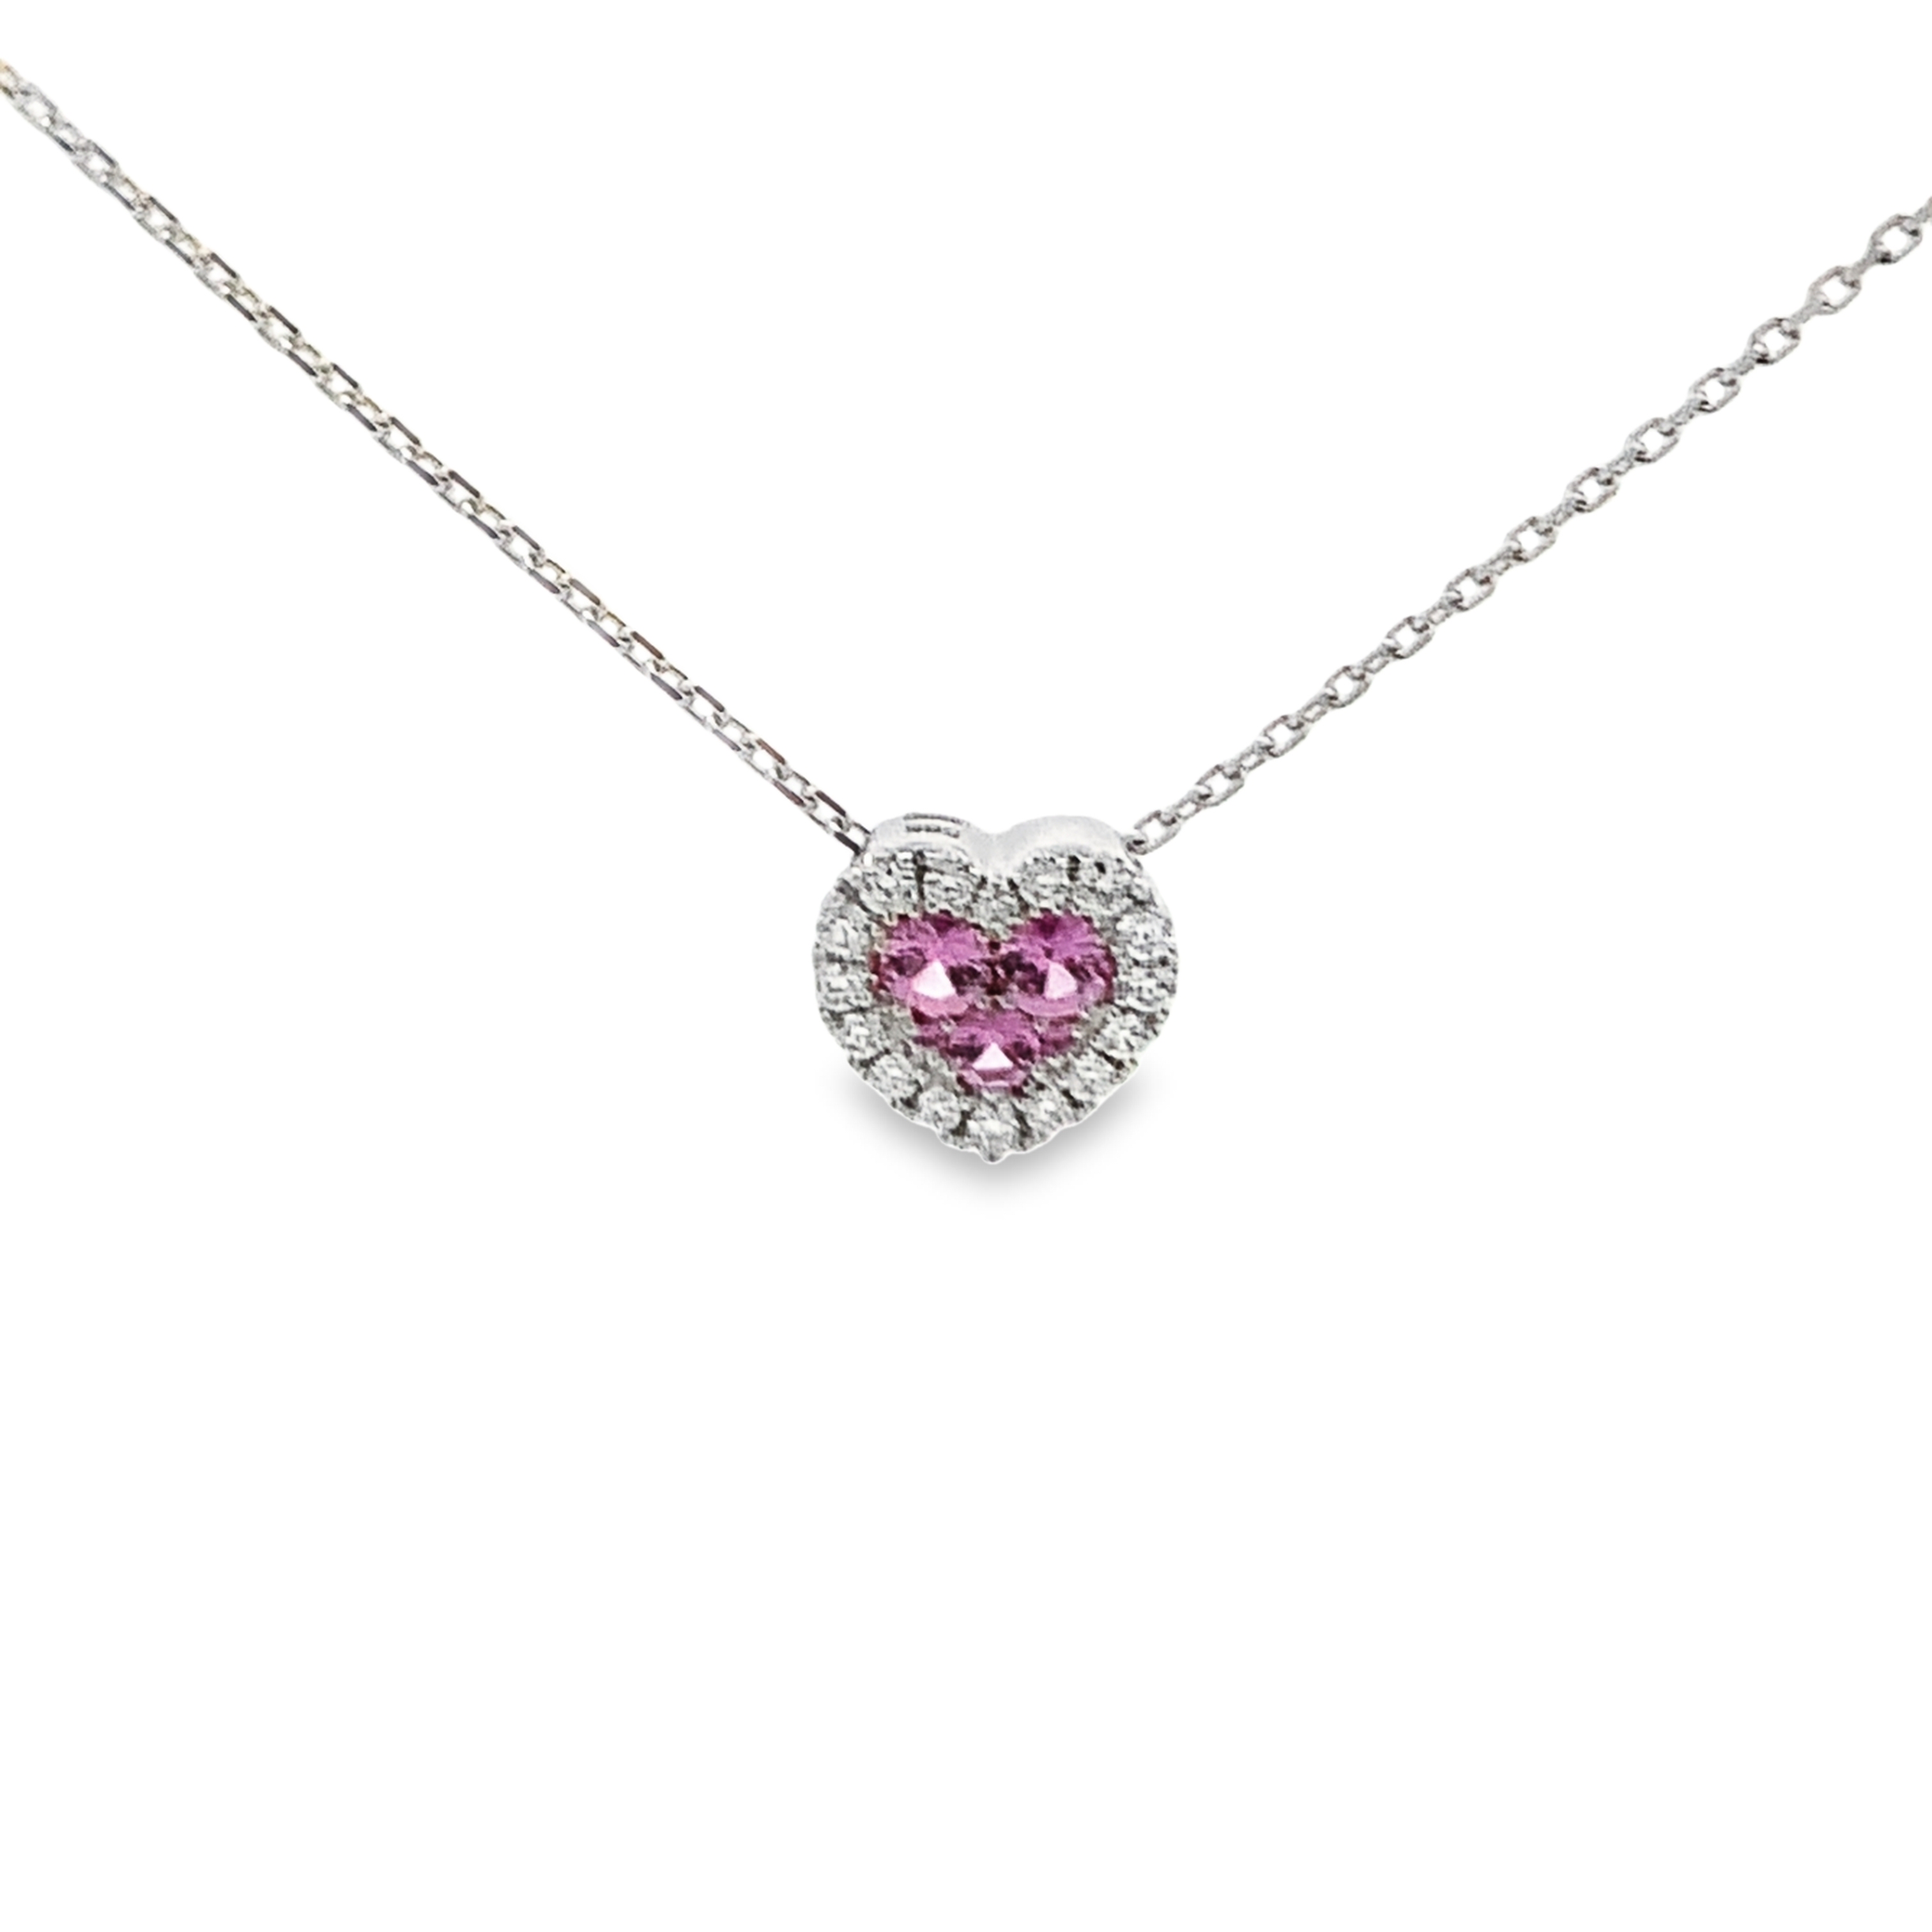 Frederic Sage 14K White Gold Pink Sapphire Heart Pendant Necklace